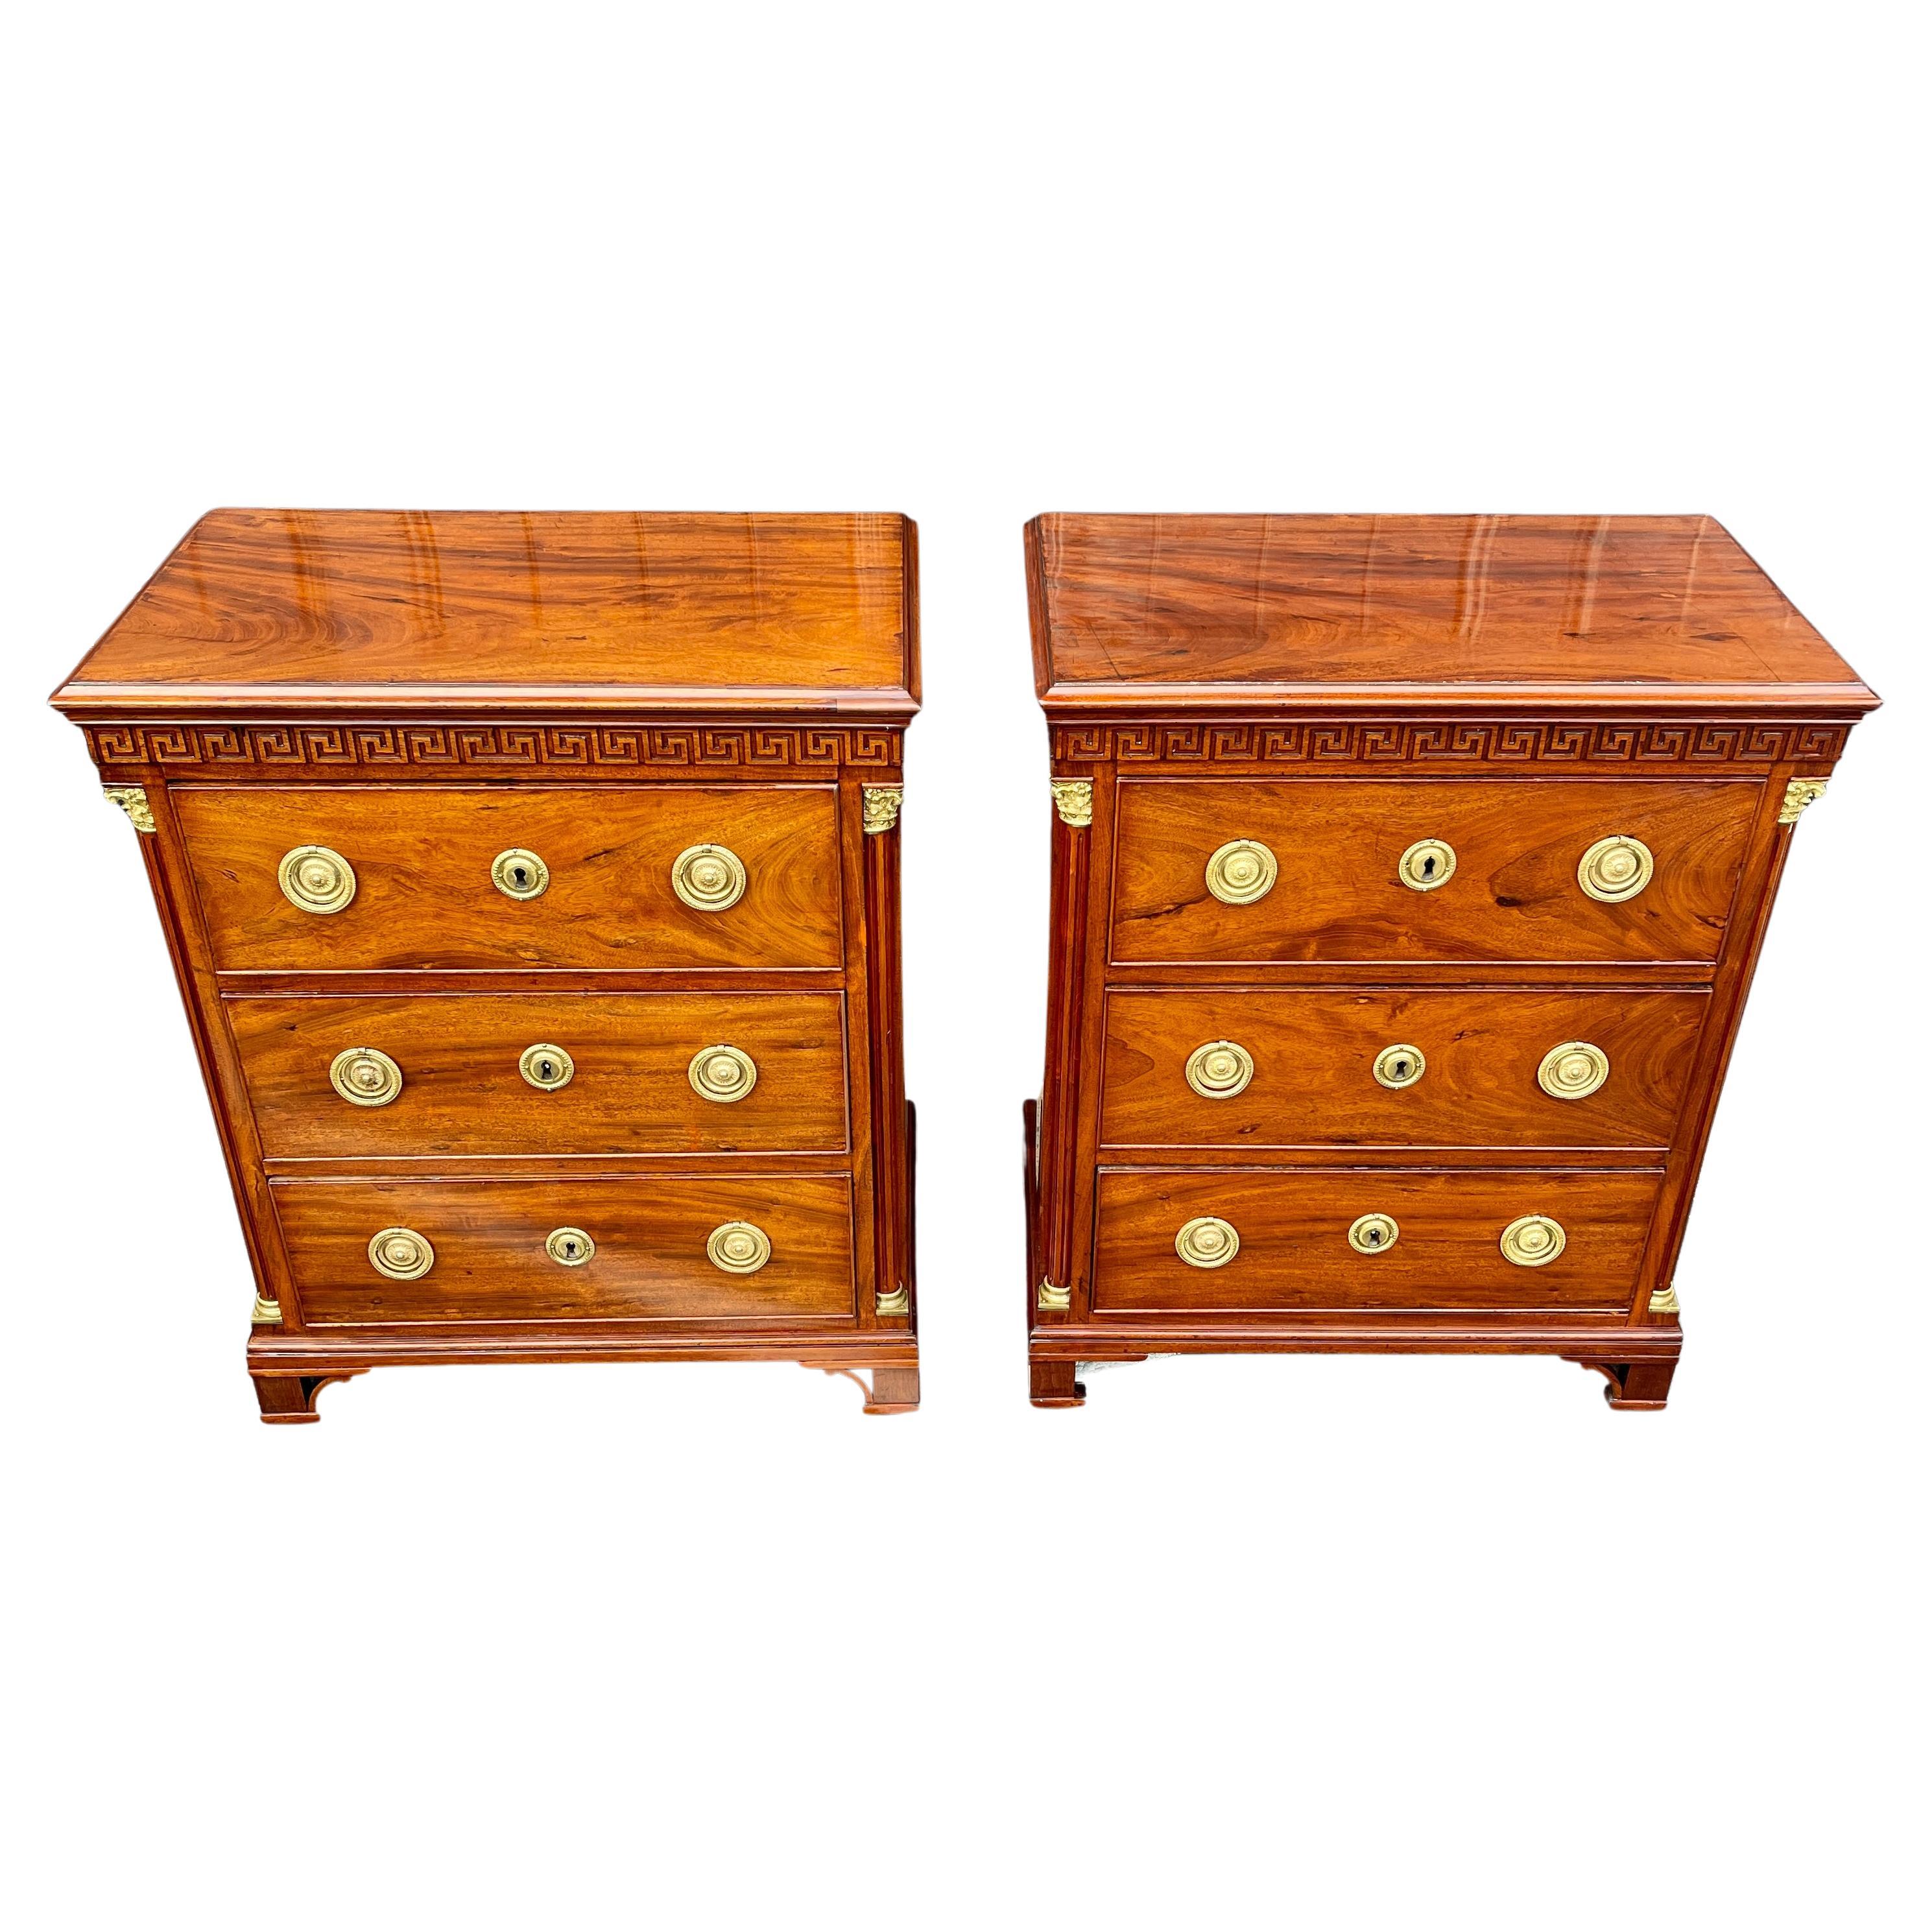 Pair of Period Empire Mahogany and Gilt Chest of Drawers, Denmark, circa 1800 In Good Condition For Sale In Haddonfield, NJ